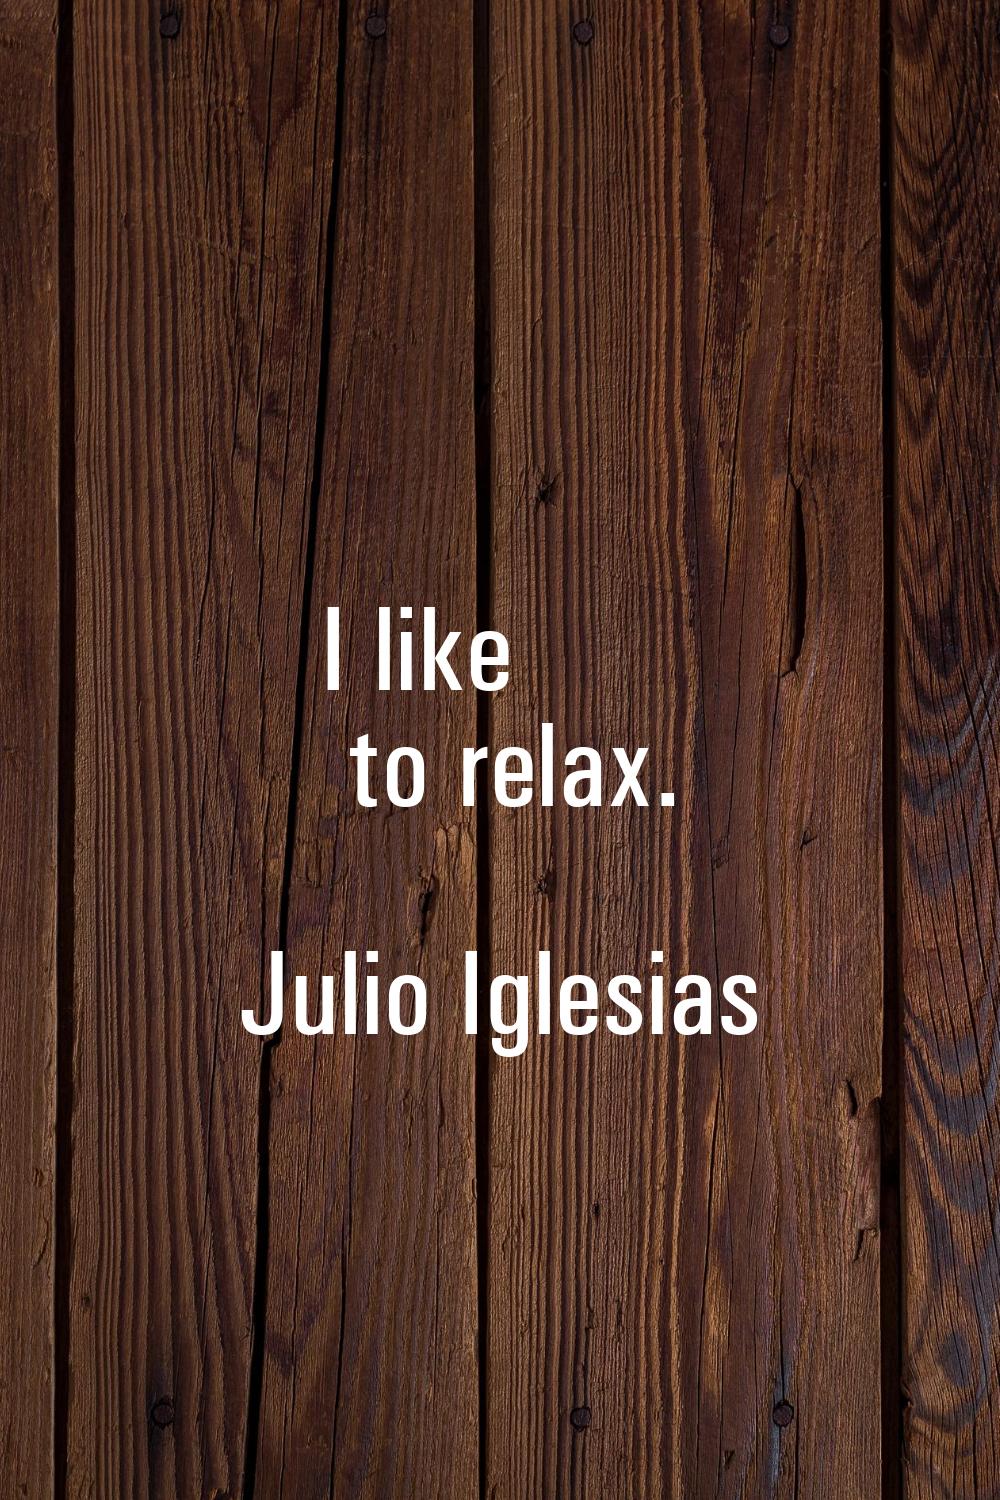 I like to relax.